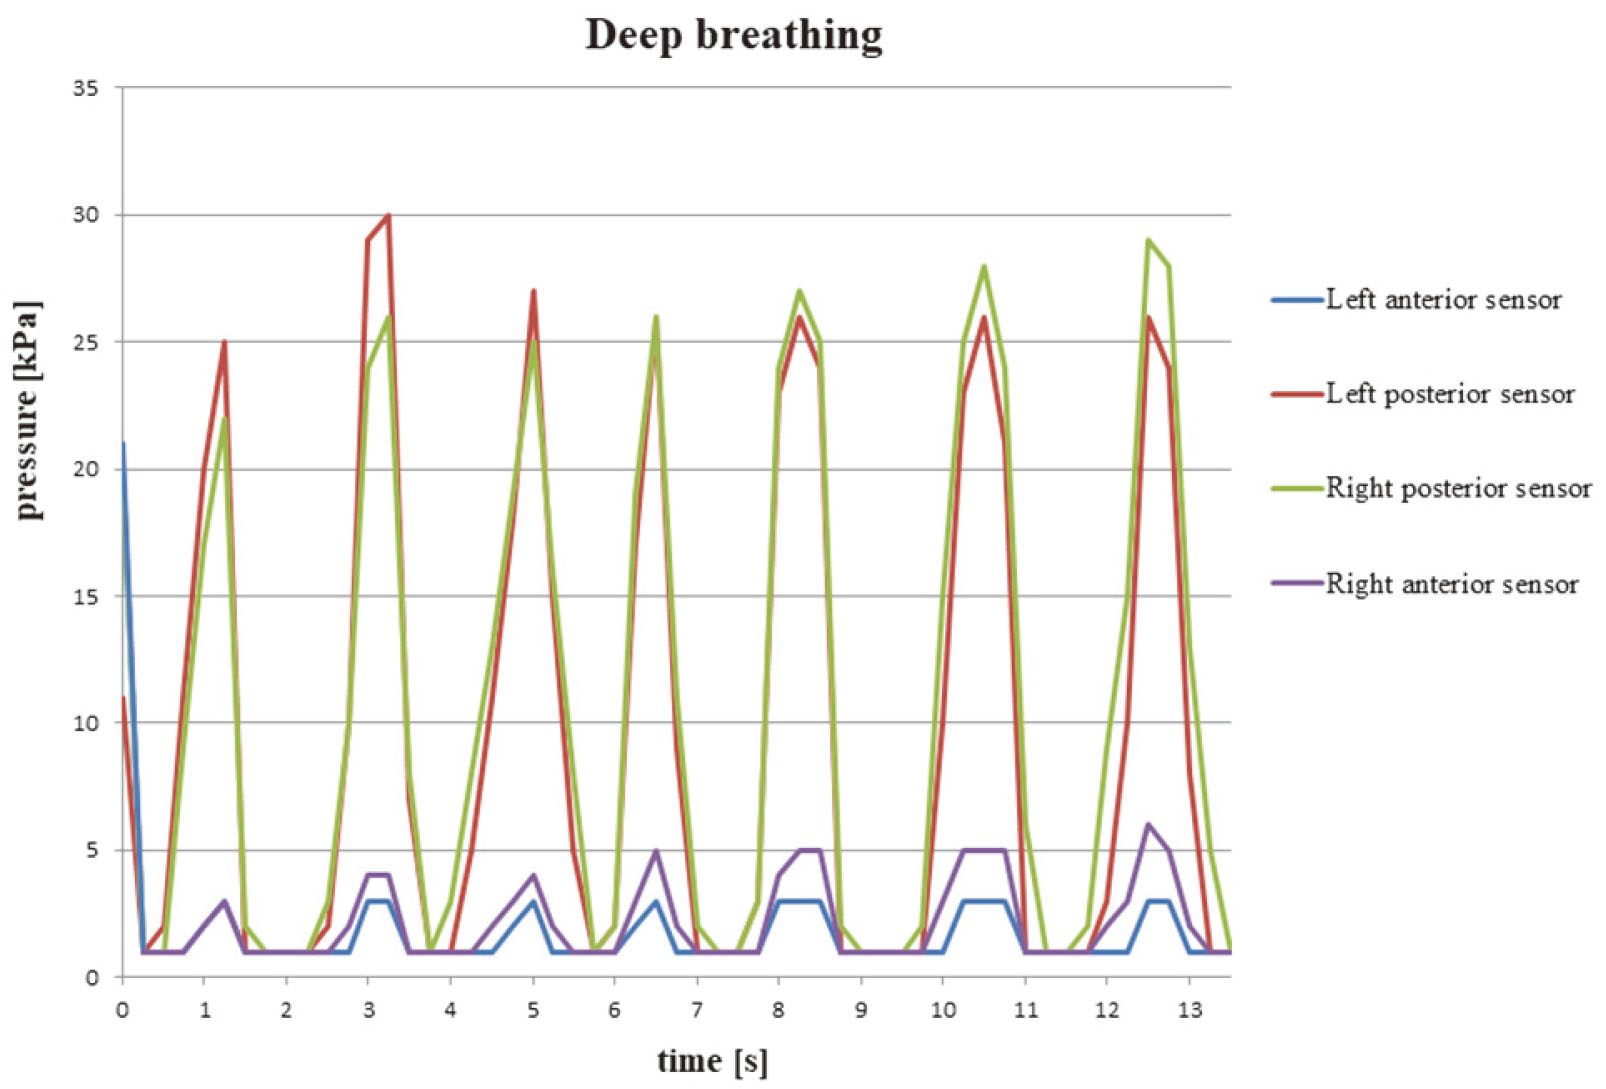 Data from DNS Brace measuring deep breathing displayed in a graph.